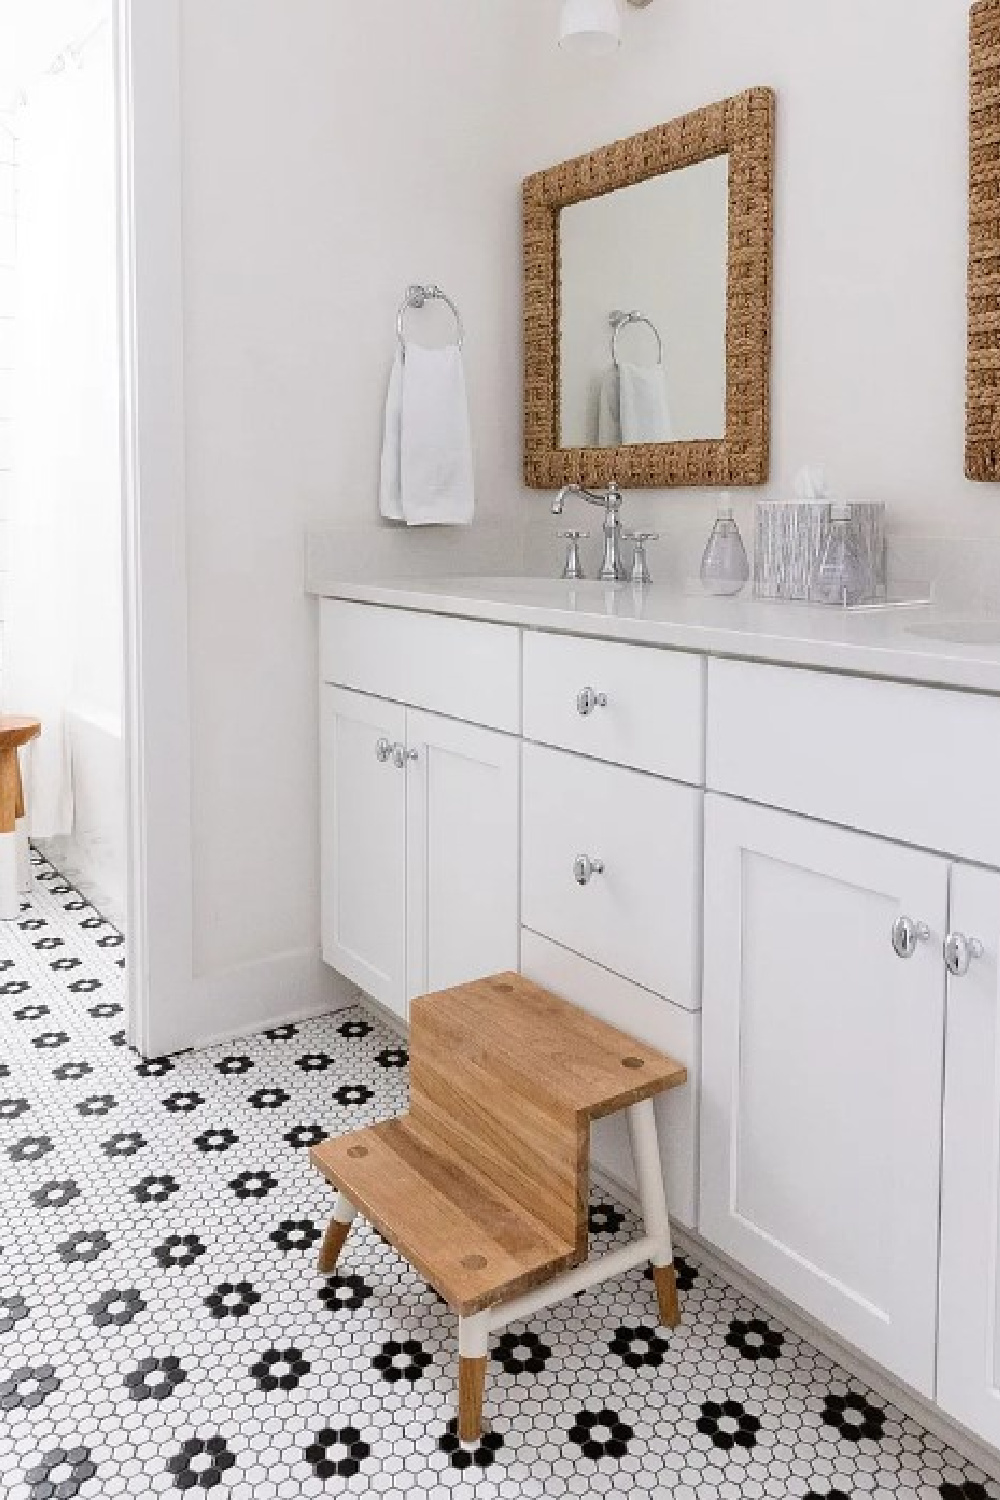 Classic white bathroom with charming tile floor in a property on Eliot Rd in Franklin, TN. #bathroomtile